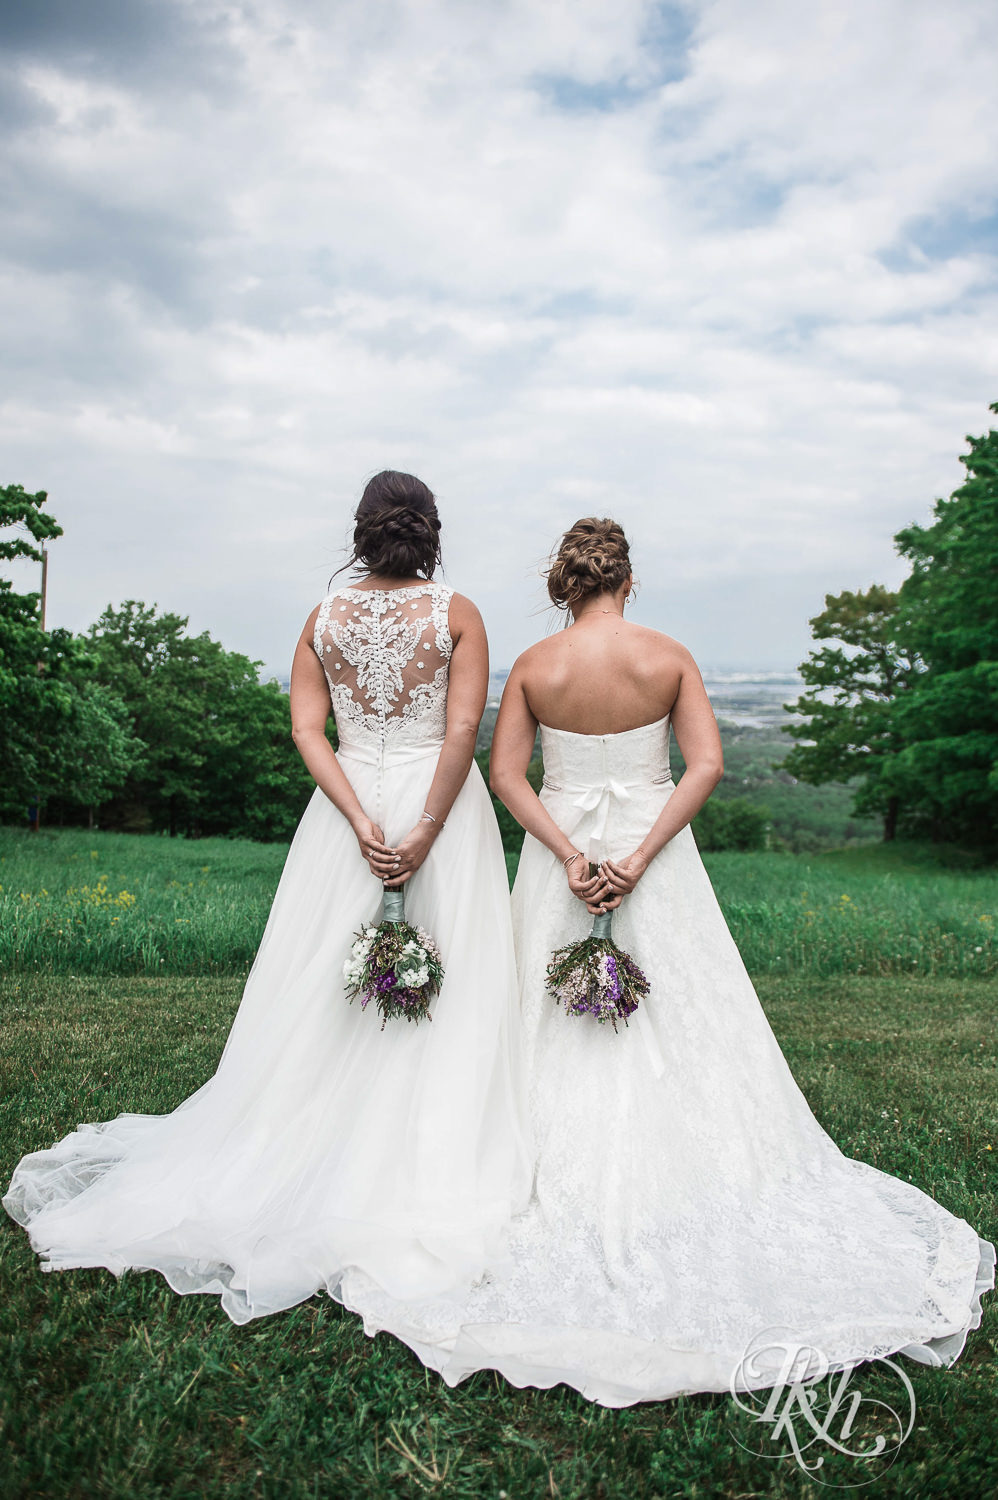 Lesbian brides hold bouquets at Spirit Mountain in Duluth, Minnesota.